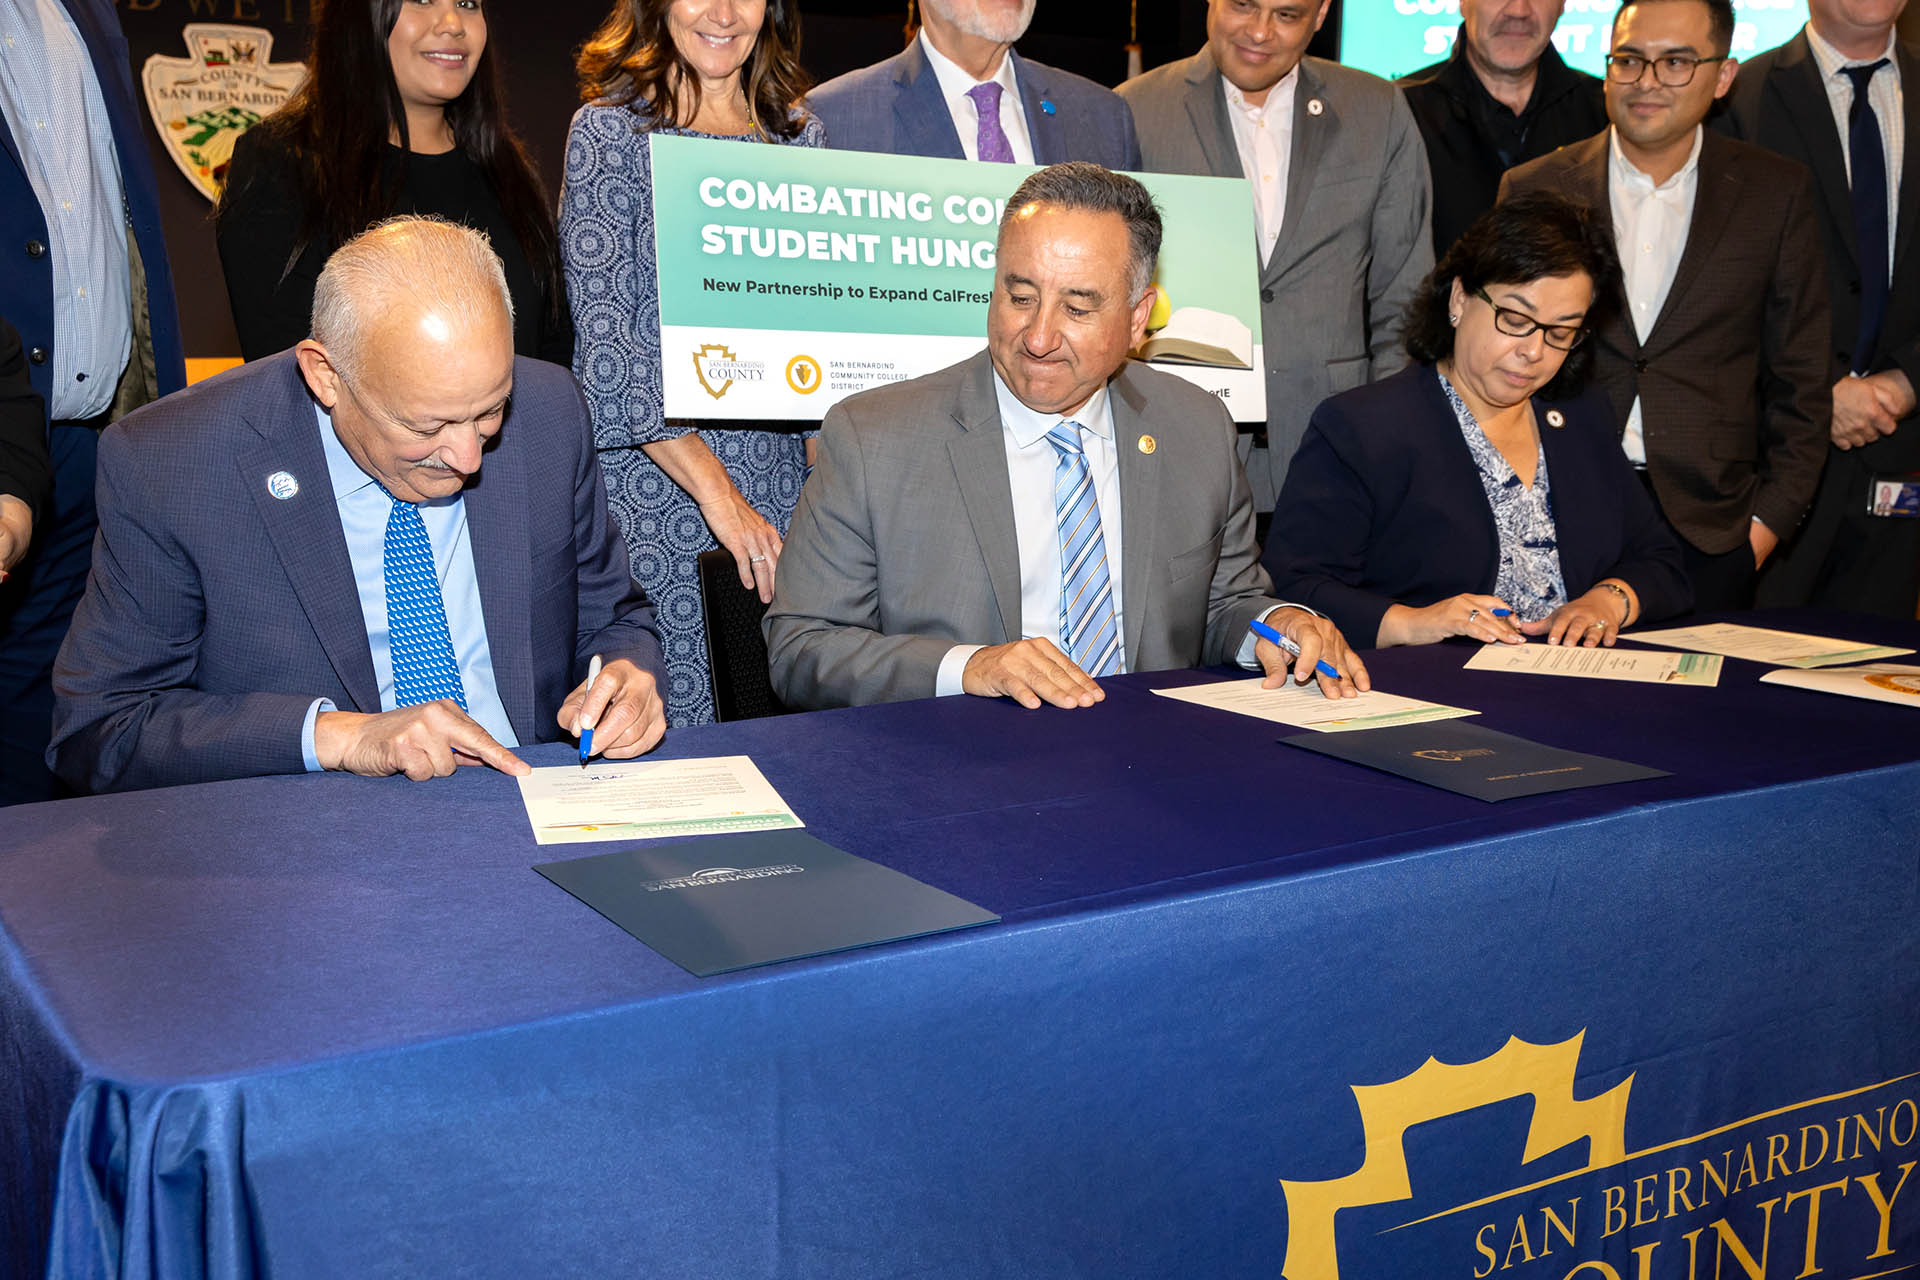 CSUSB President Tomás D. Morales (left) signs the memorandum of understanding that will increase the accessibility of California’s CalFresh Program, the state’s name for the federal Supplemental Nutrition Assistance Program, or “SNAP.” Looking on ar San Bernardino County 5th District Supervisor Joe Baca Jr., and San Bernardino Community College District Chancellor Diana Z. Rodriguez. 